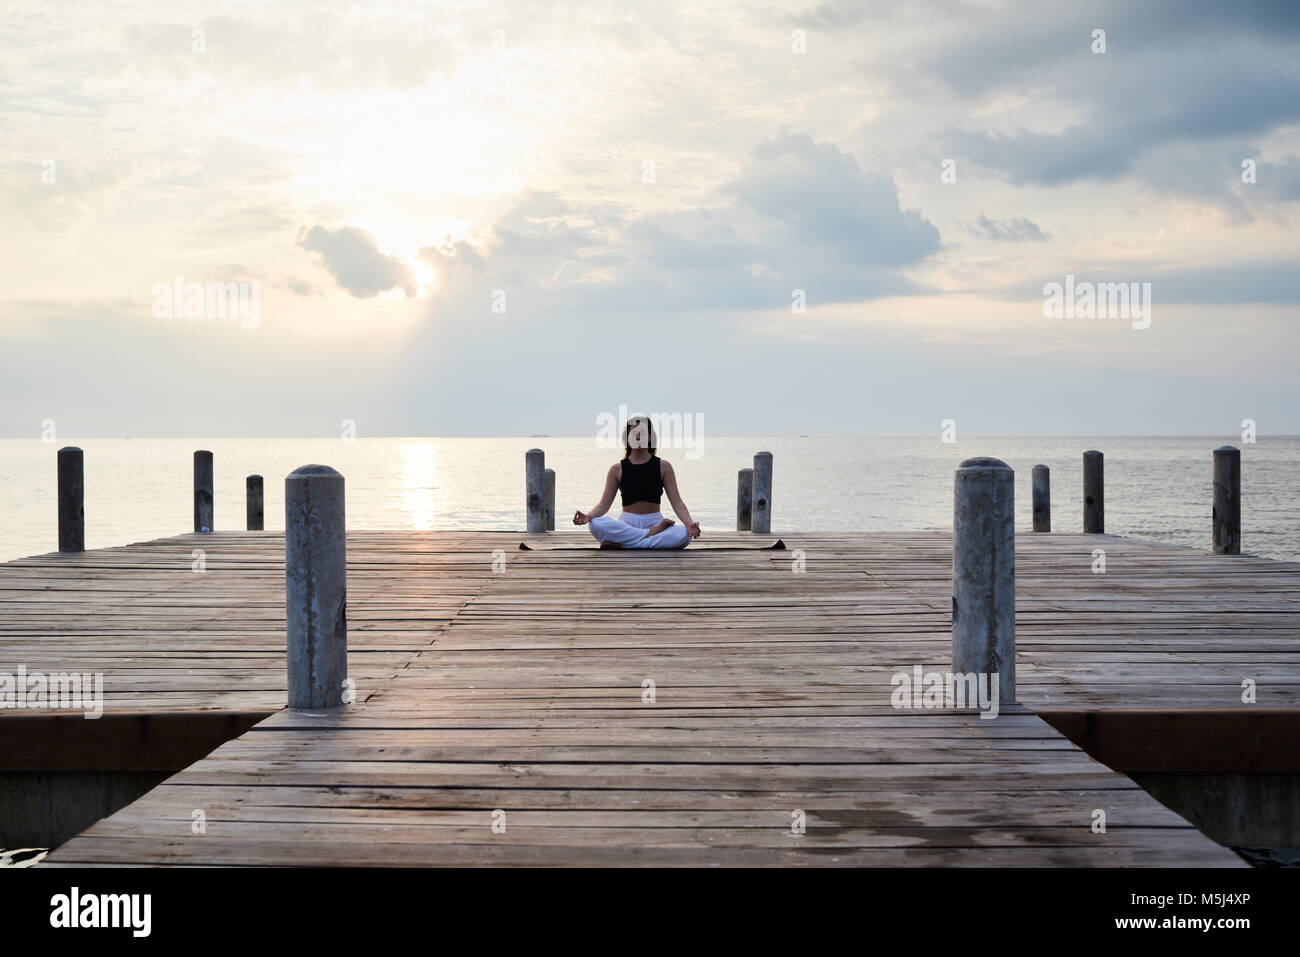 Yoga instructor practicing meditation in a lotus position against sunset and sea. Kep, Cambodia. Stock Photo